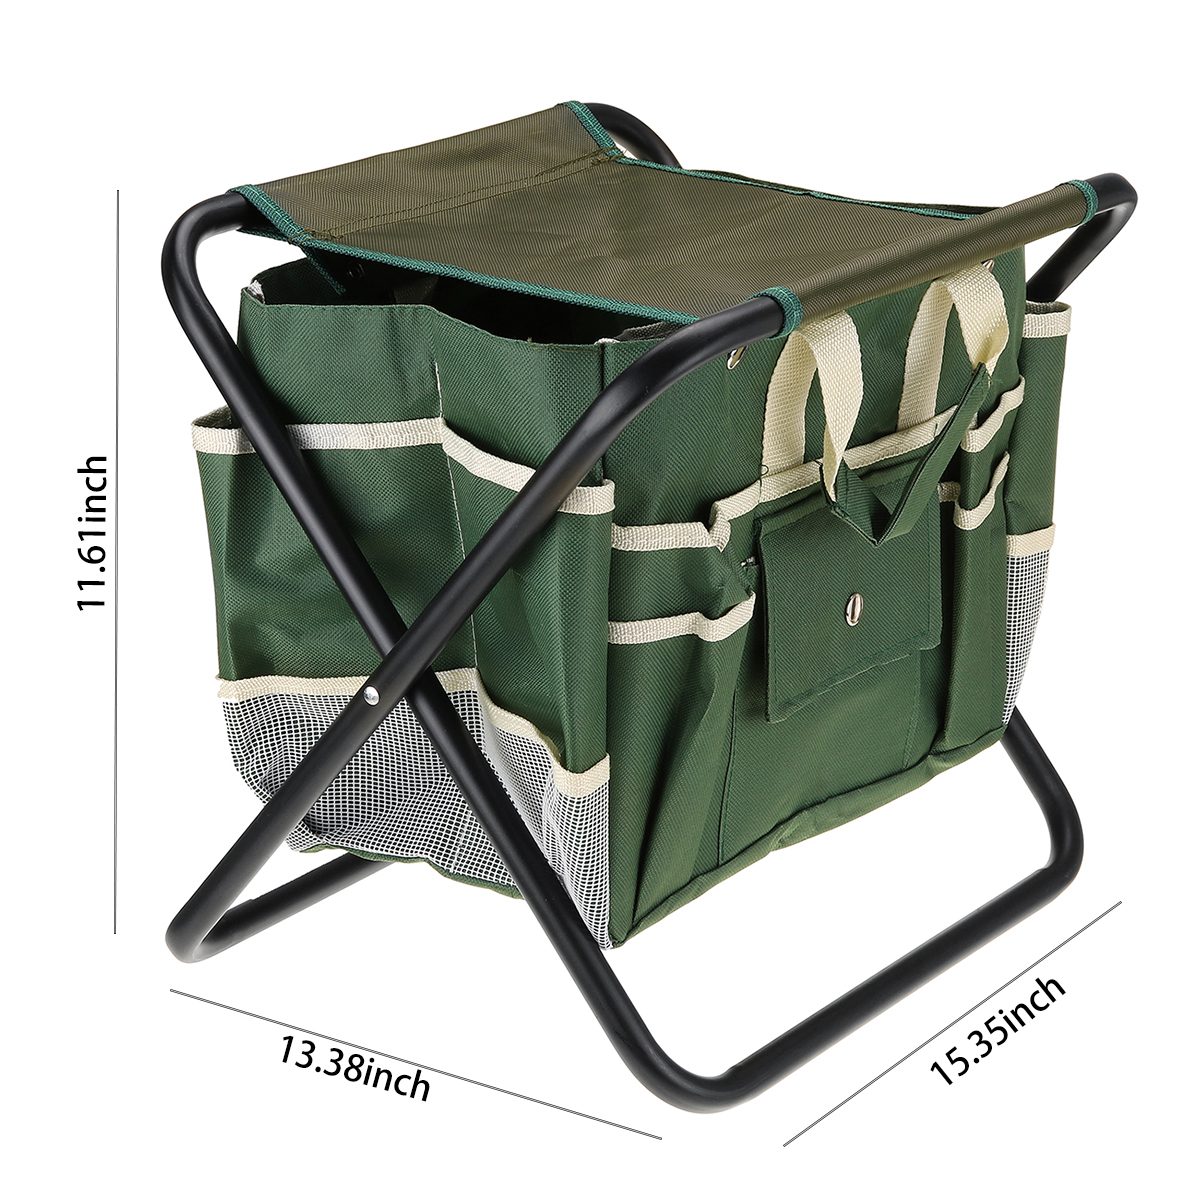 2-in-1-Folding-Chair-Fishing-Seat-with-Storage-Bag-Ultralight-Aluminum-Stool-Home-Furniture-Fishing--1792092-7